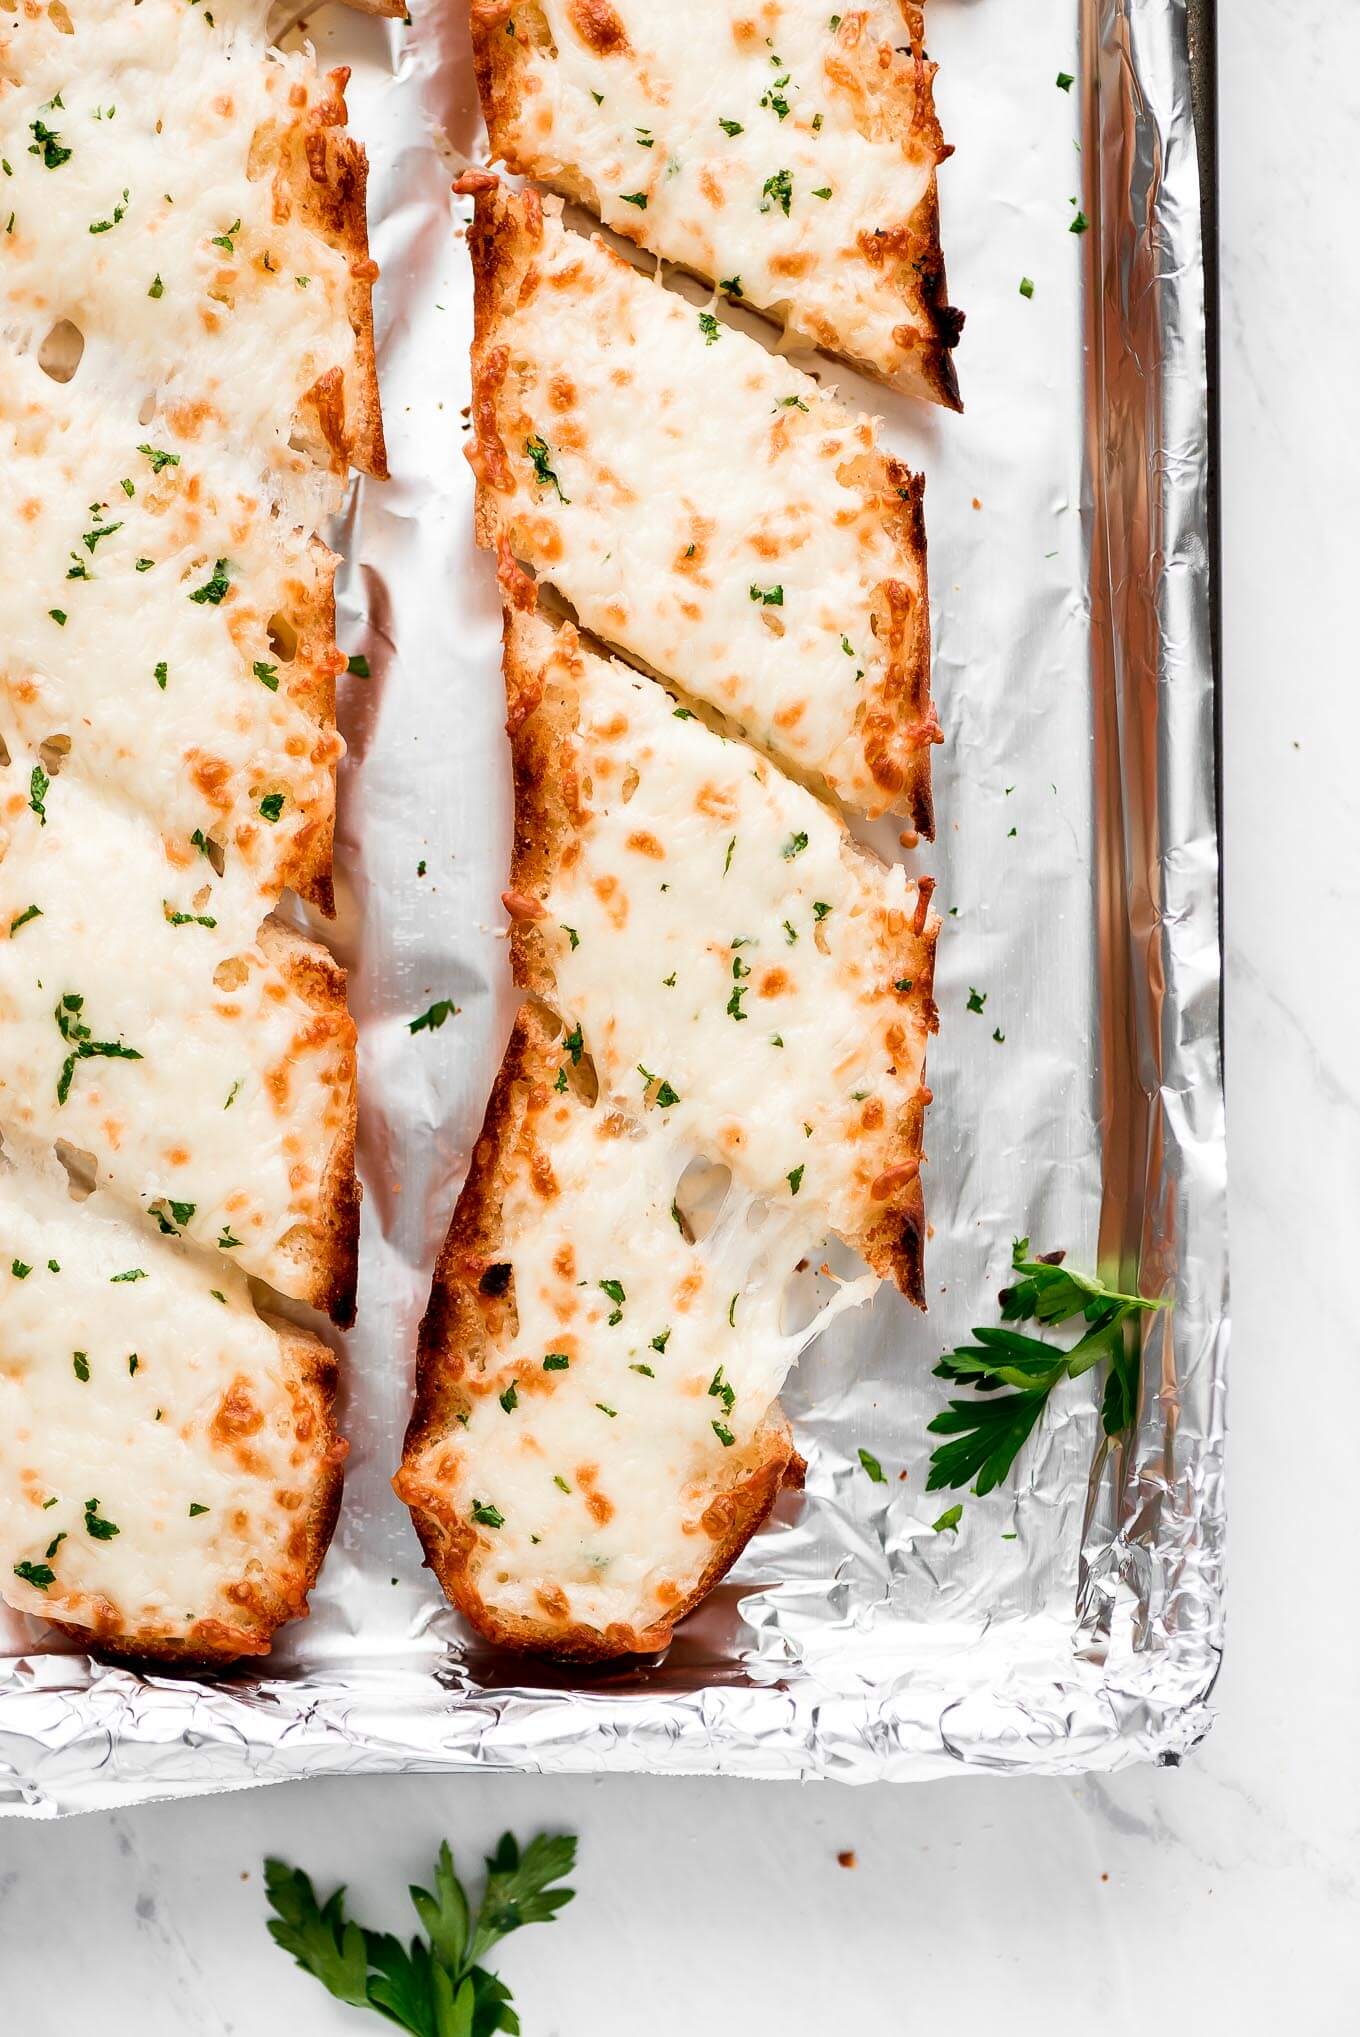 french bread sprinkled with parsley and cheese and broiled until melted and golden brown.